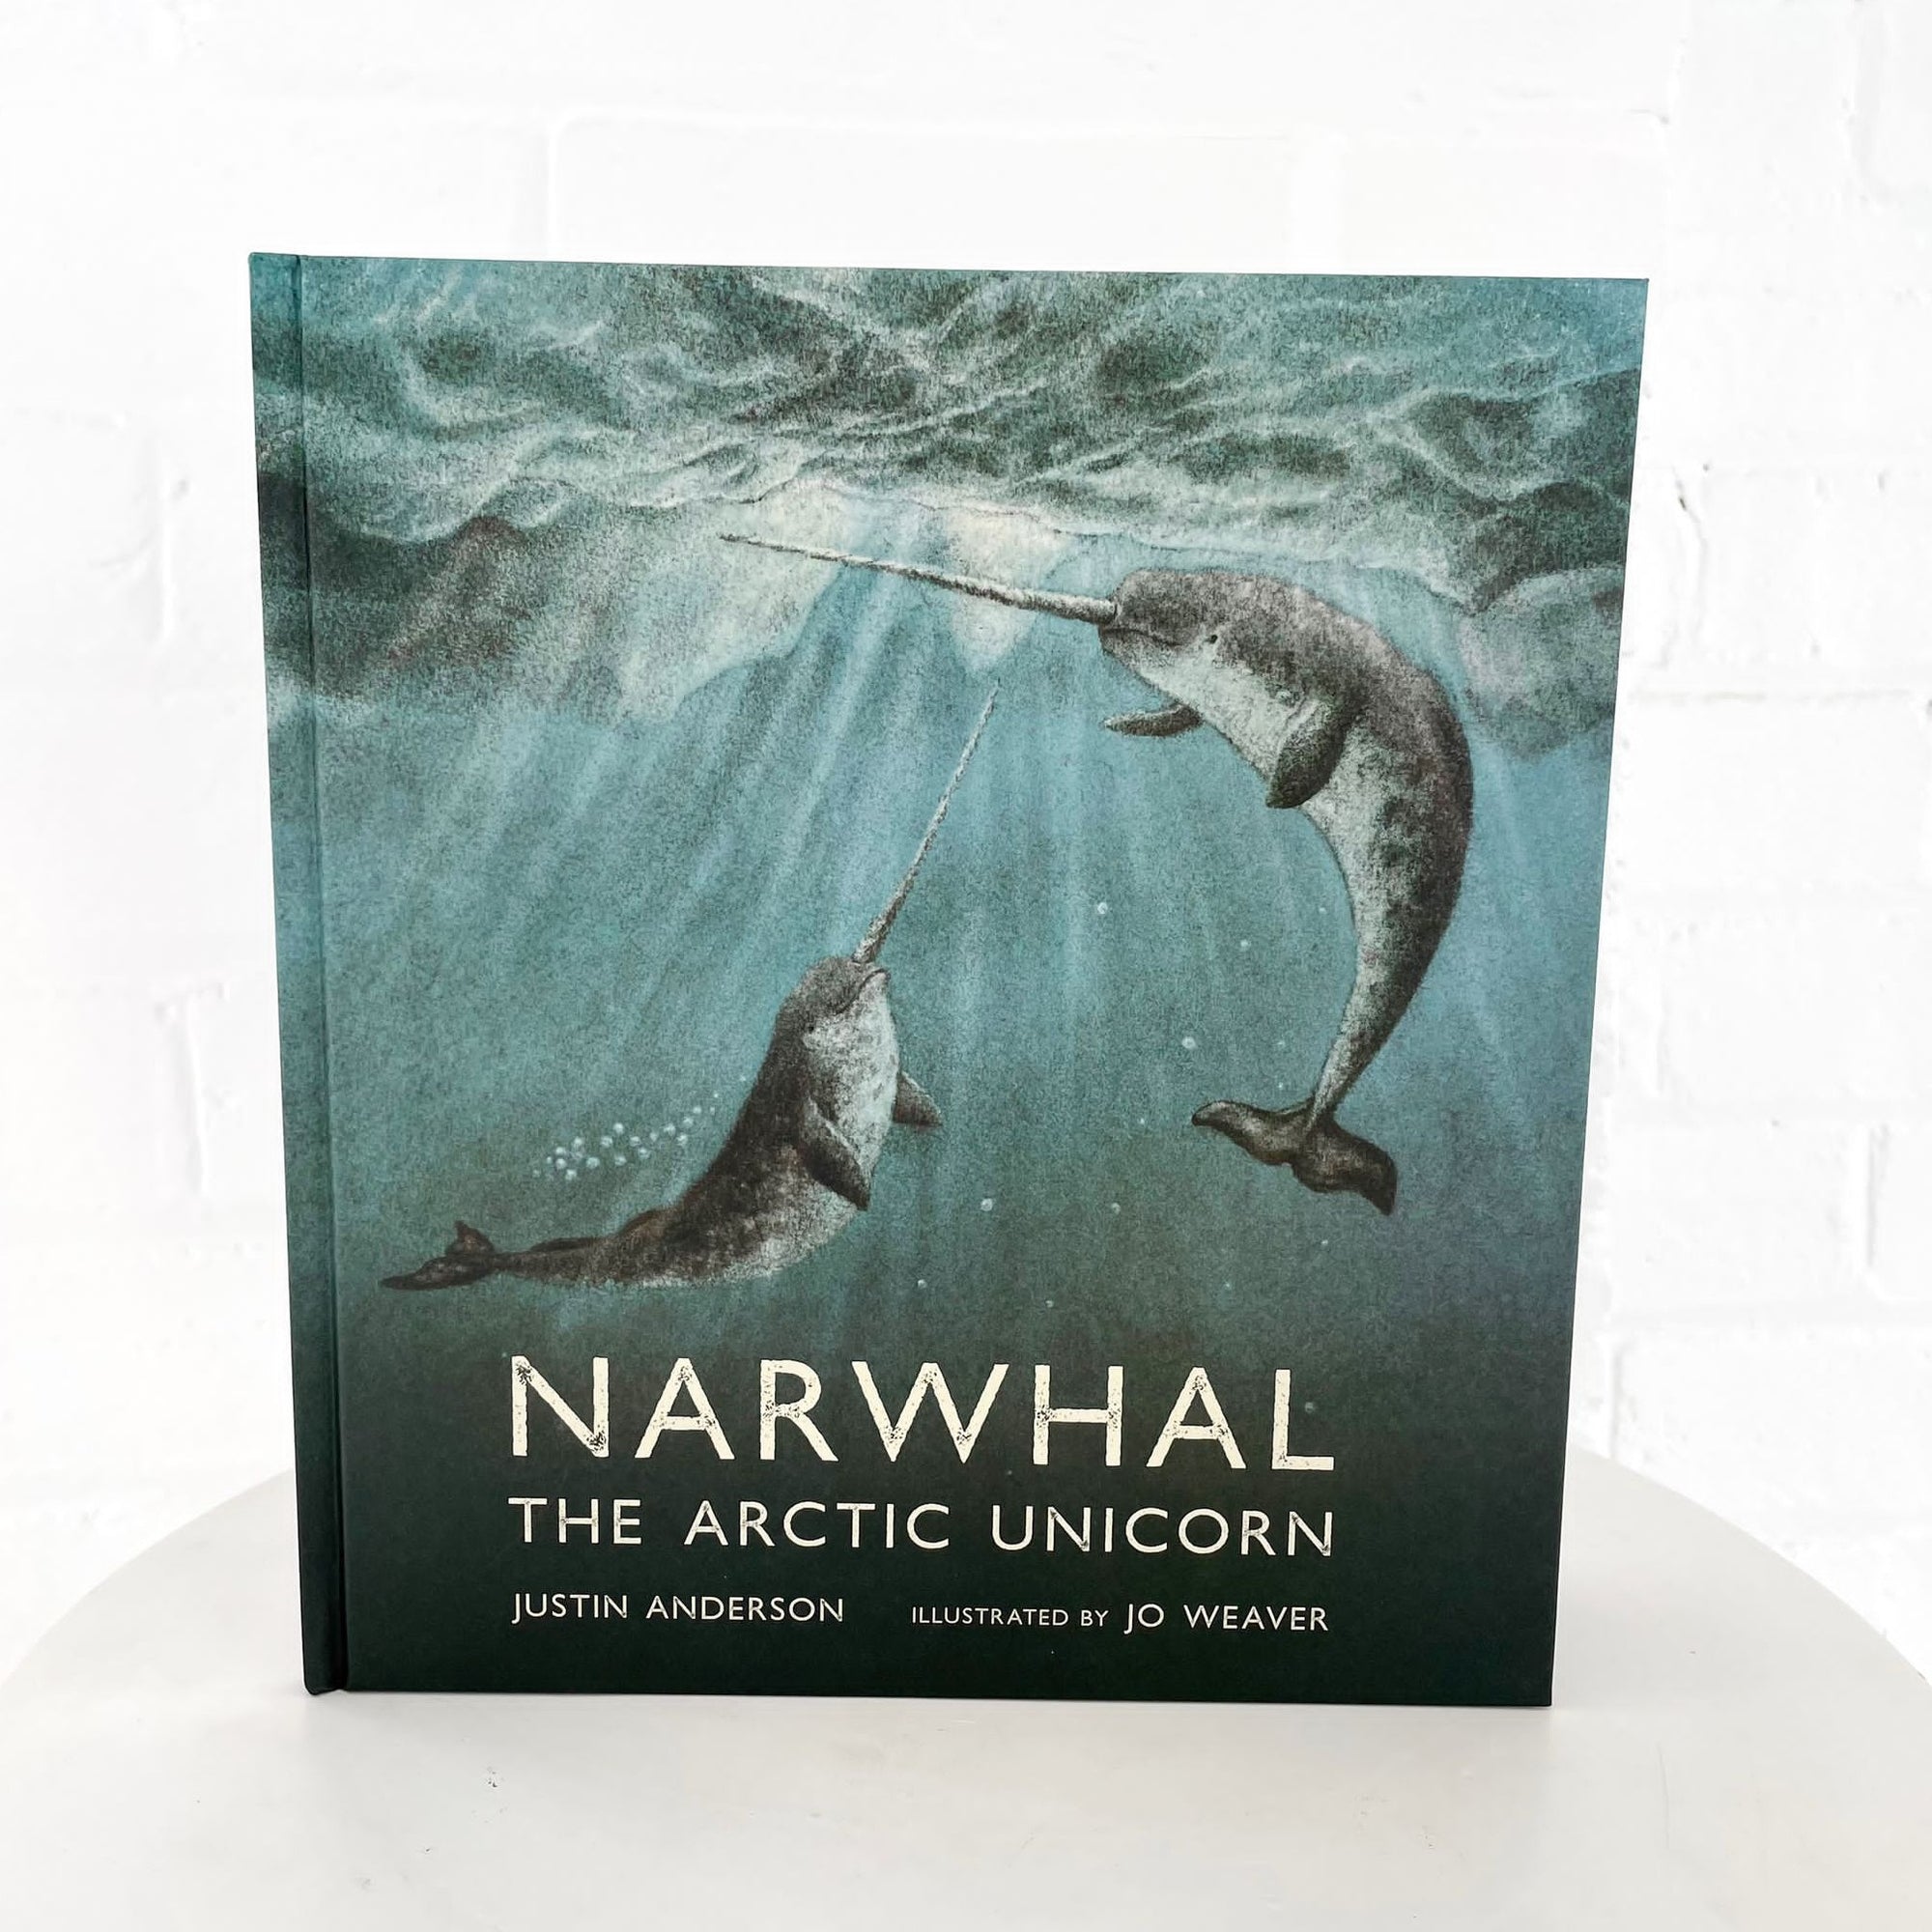 NARWHAL: THE ARTIC UNICORN